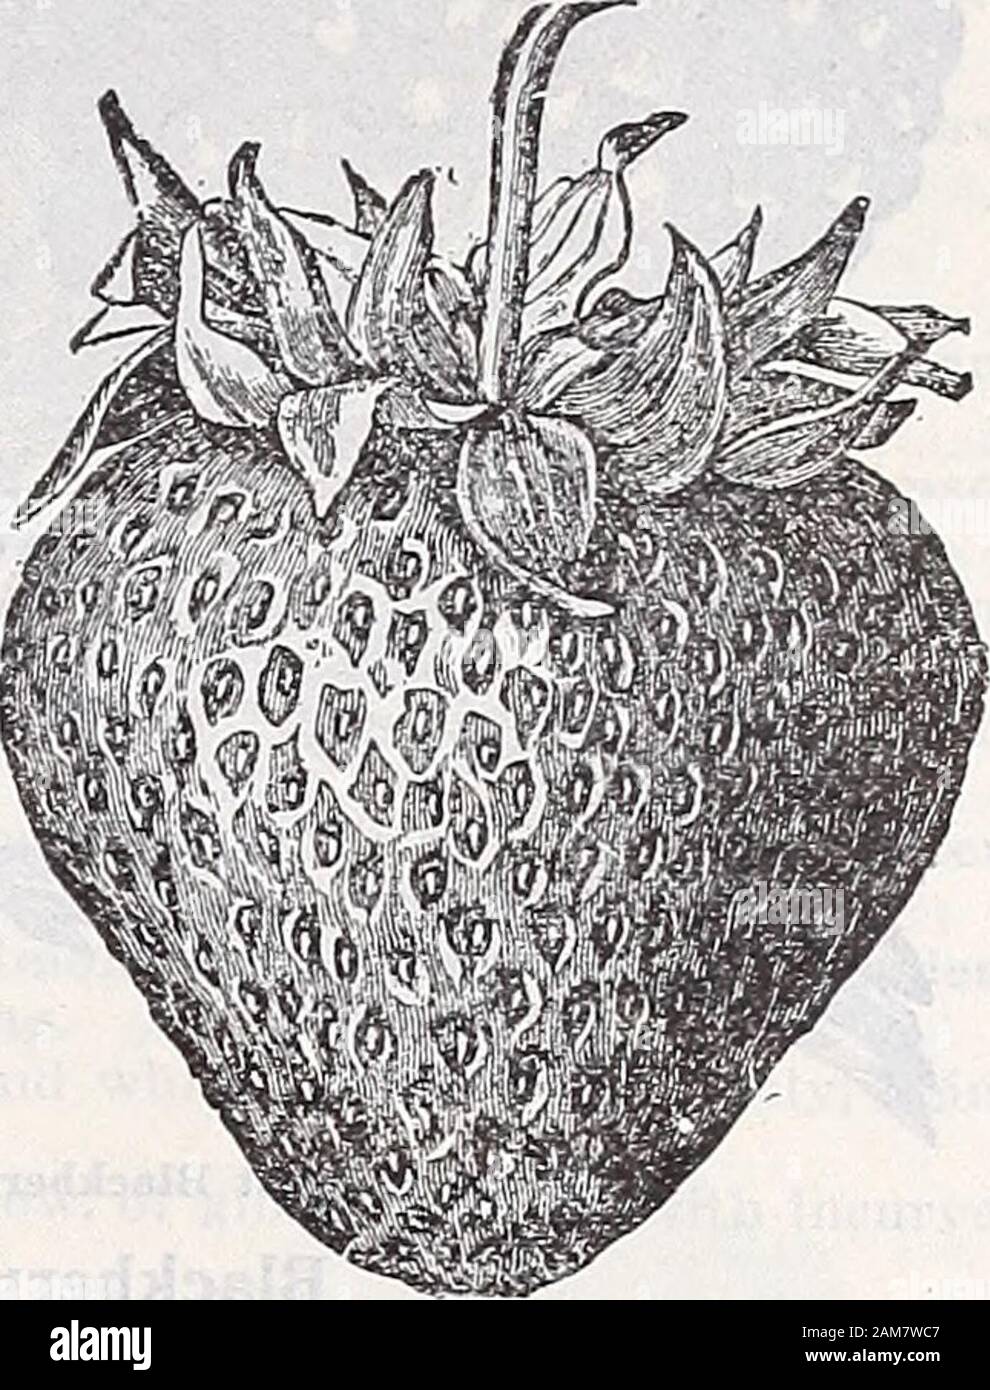 Annual catalogue of Schwill's sure seeds . Lady Corneille Strawberry. Aroma Strawberry.. Klondyke Strawberry New Strawberry, Lady Corneille—A wonderful new strawberryfrom Louisiana, ripens with Klondyke, but continues inbearing longer; berries large, rich, glossy red, slightly long,uniform in size and shape; rich, juicy, sweet and delicious.The plant is vigorous, with dark green glossy leaves, andstands drouth better than any other variety. Lady Cor-neille is a better berry than Klondyke for shipping, beinglarger, darker in color, and carries well in transit. Flowersperfect, therefore will pro Stock Photo